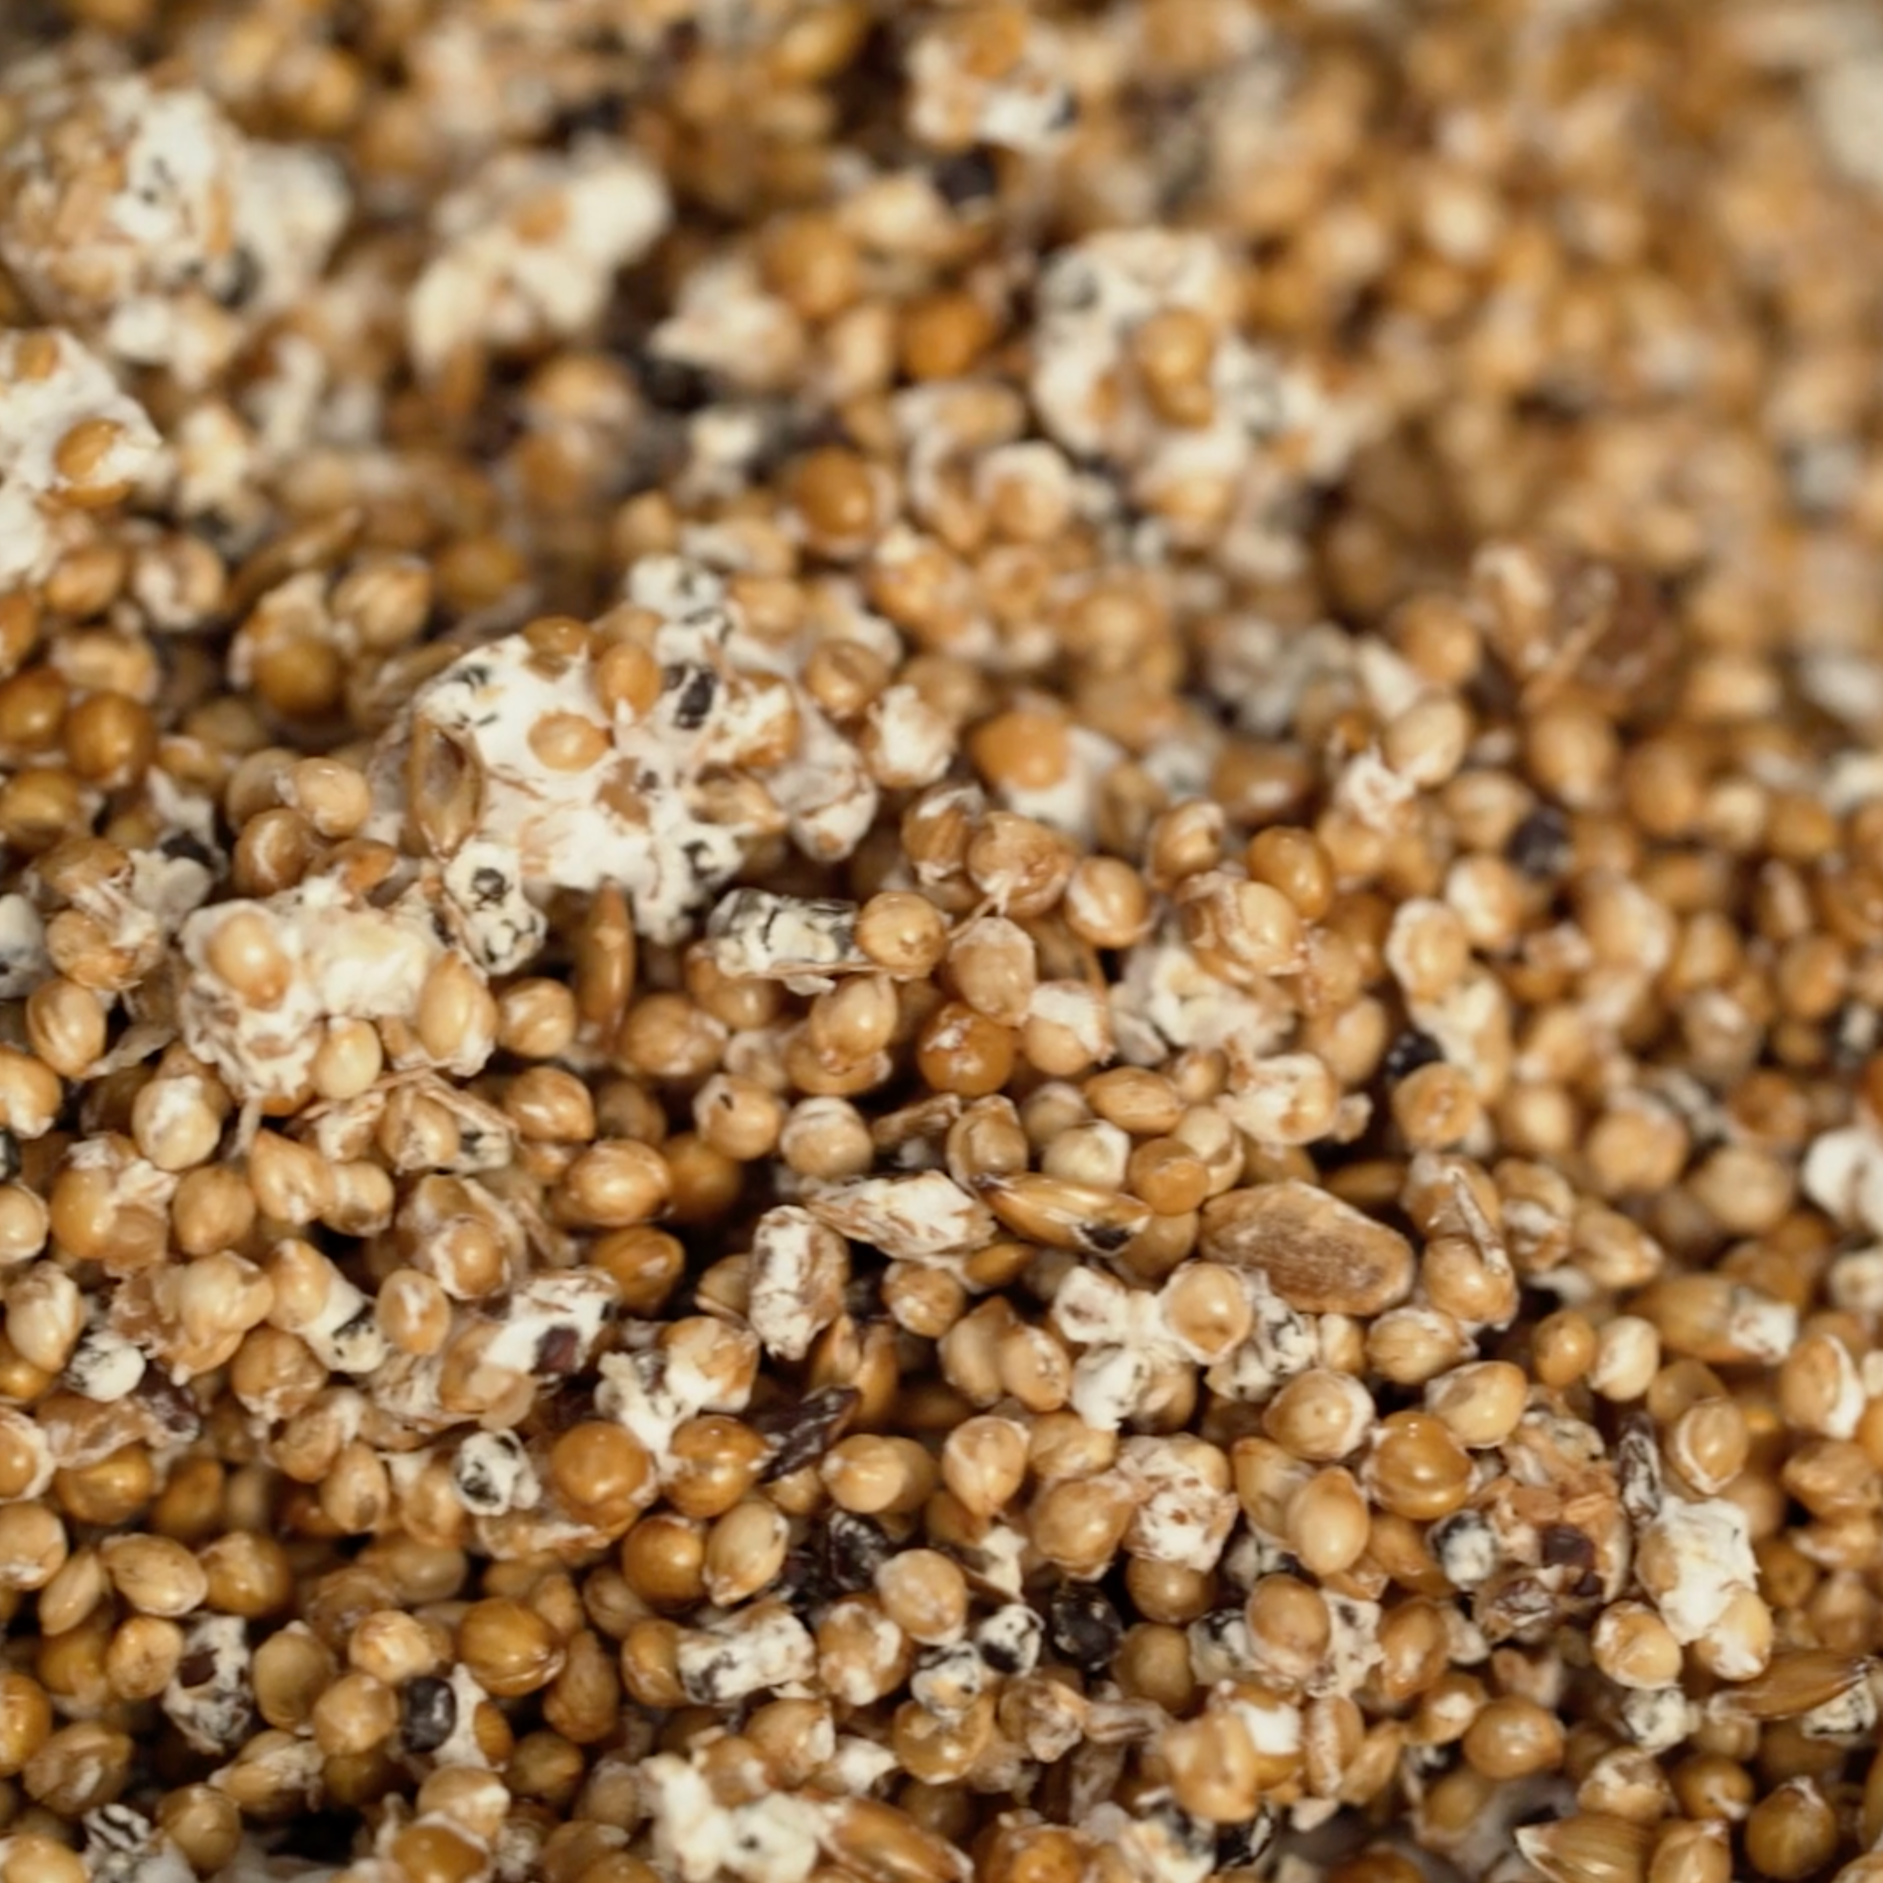 Close up of loose mushroom grain spawn showing millet and oats and mycelium.